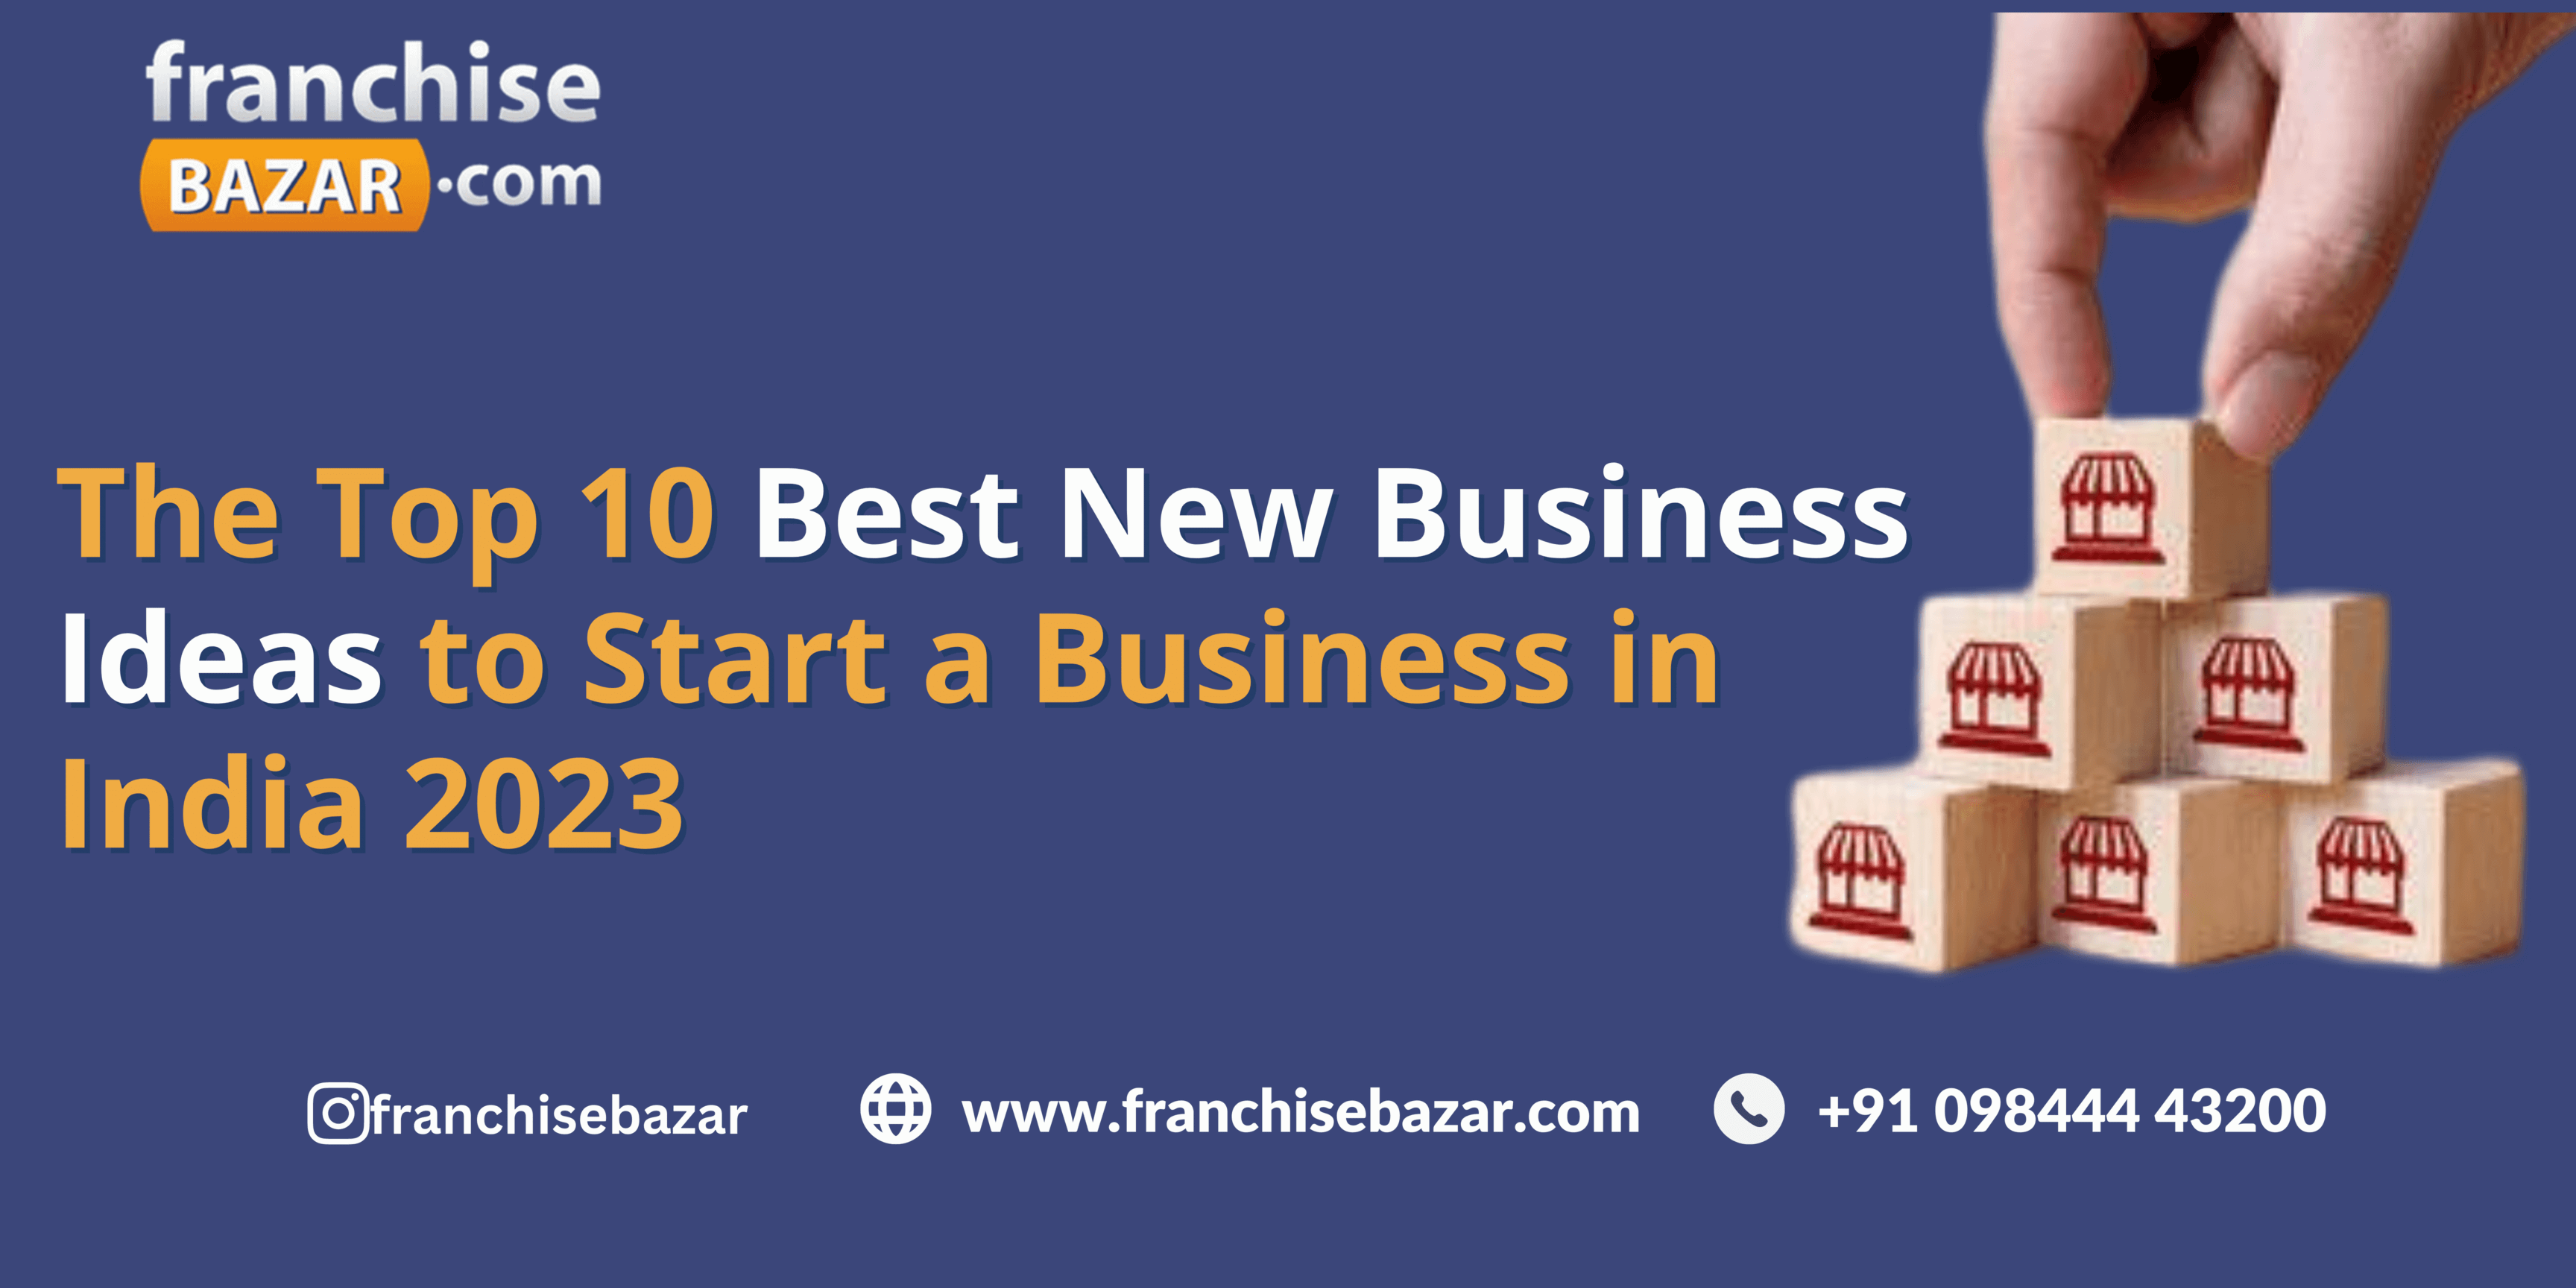 The Top 10 Best New Business Ideas to Start a Business in India 2023